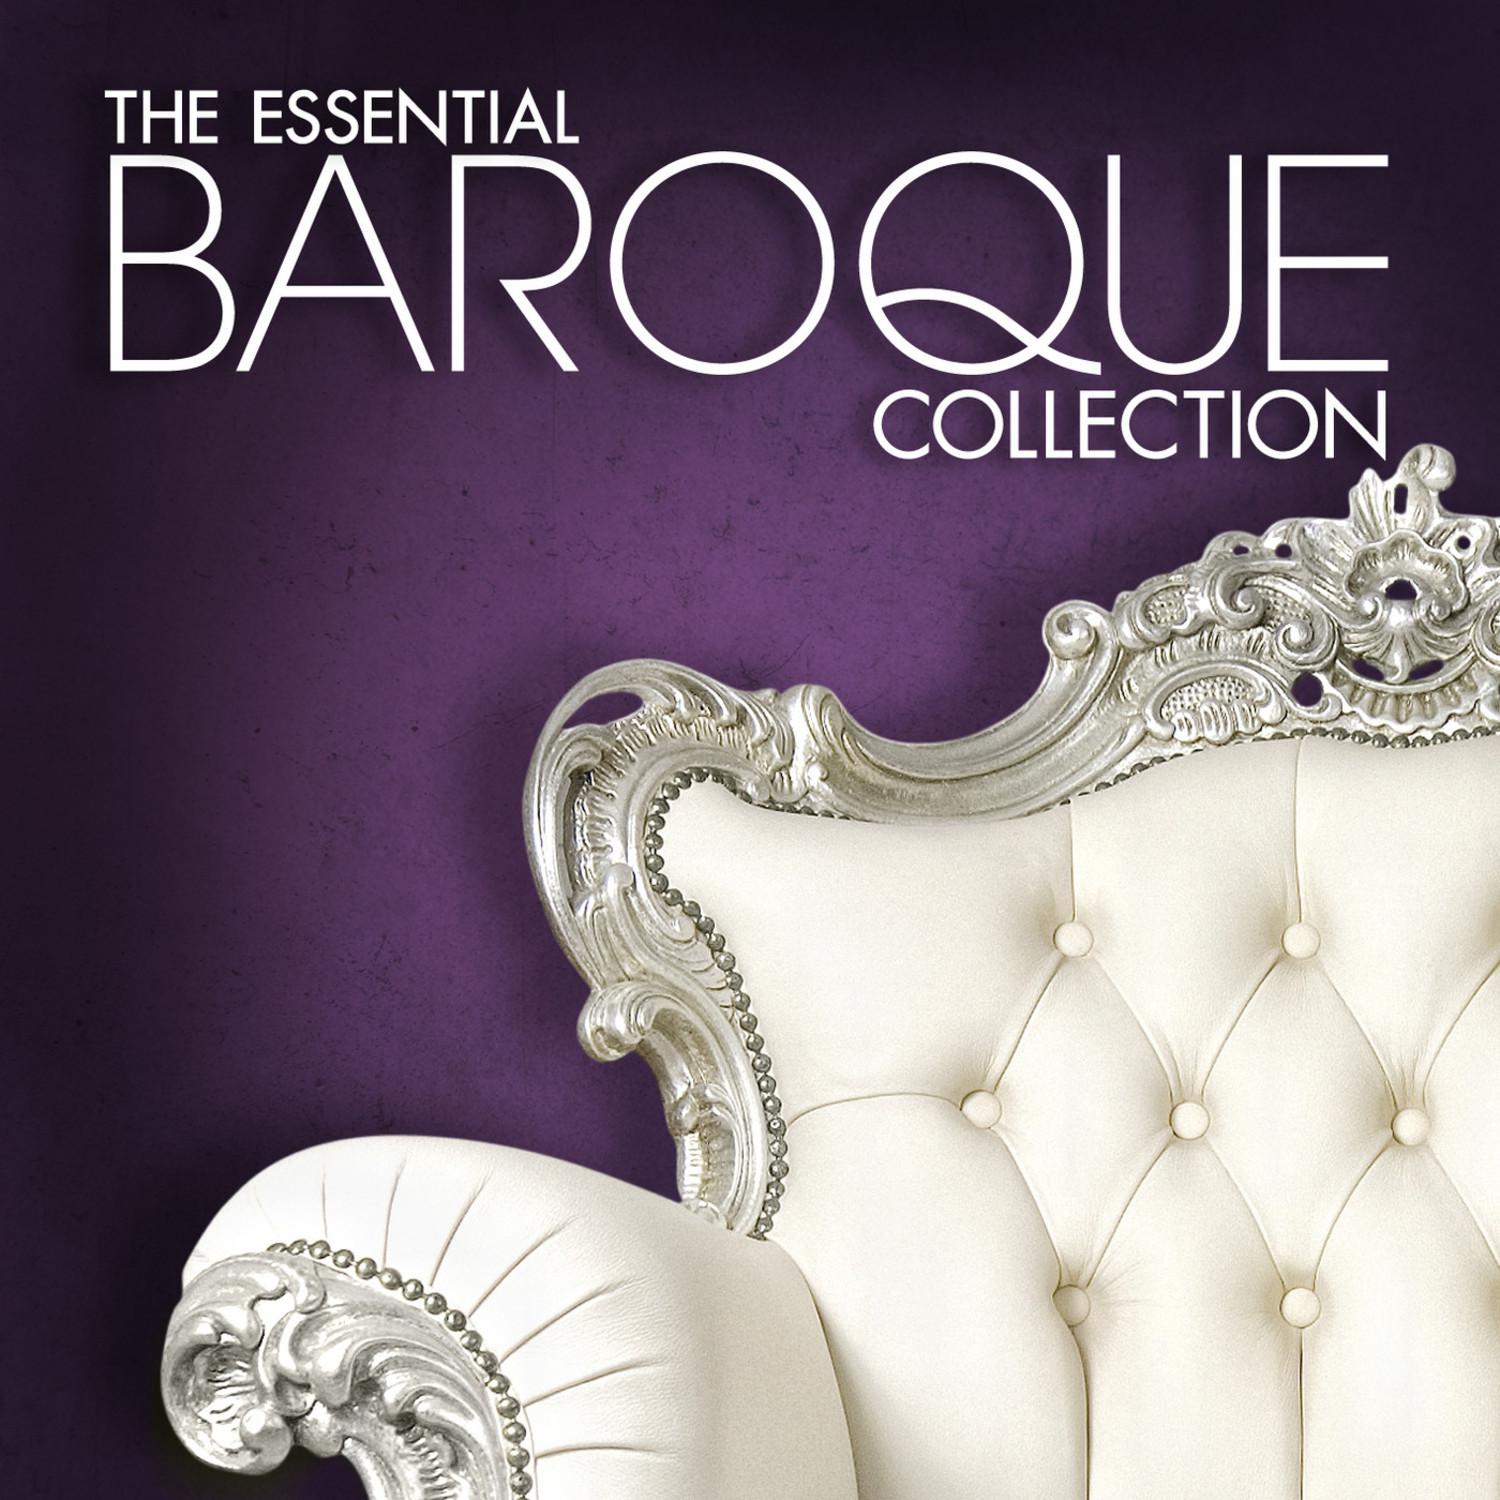 The Essential Baroque Collection